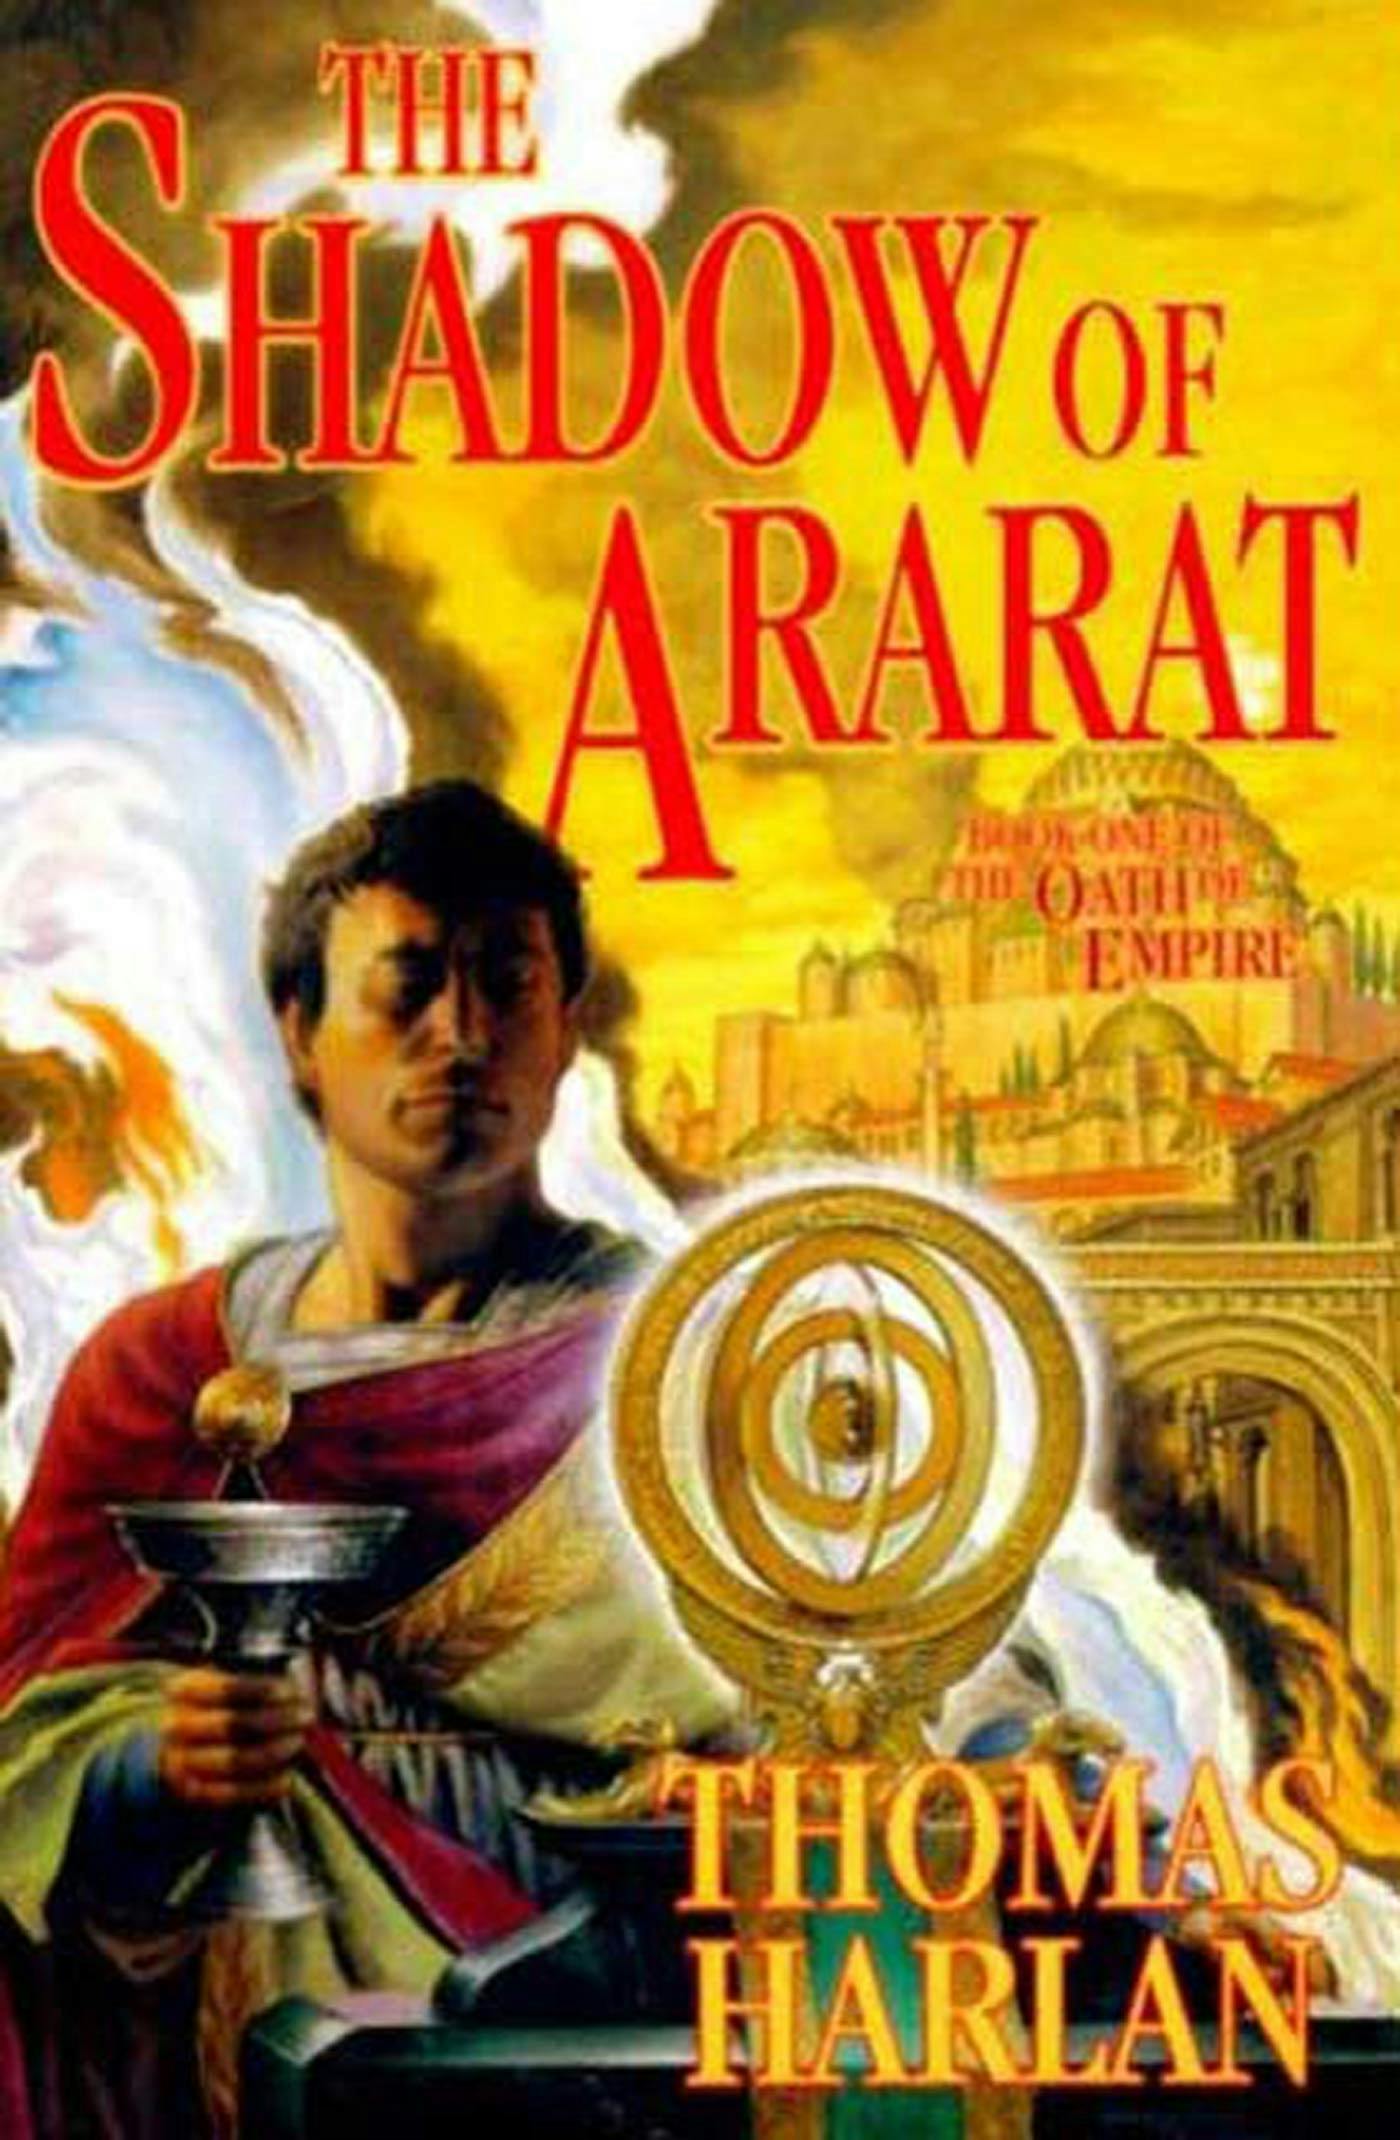 Cover for the book titled as: The Shadow of Ararat